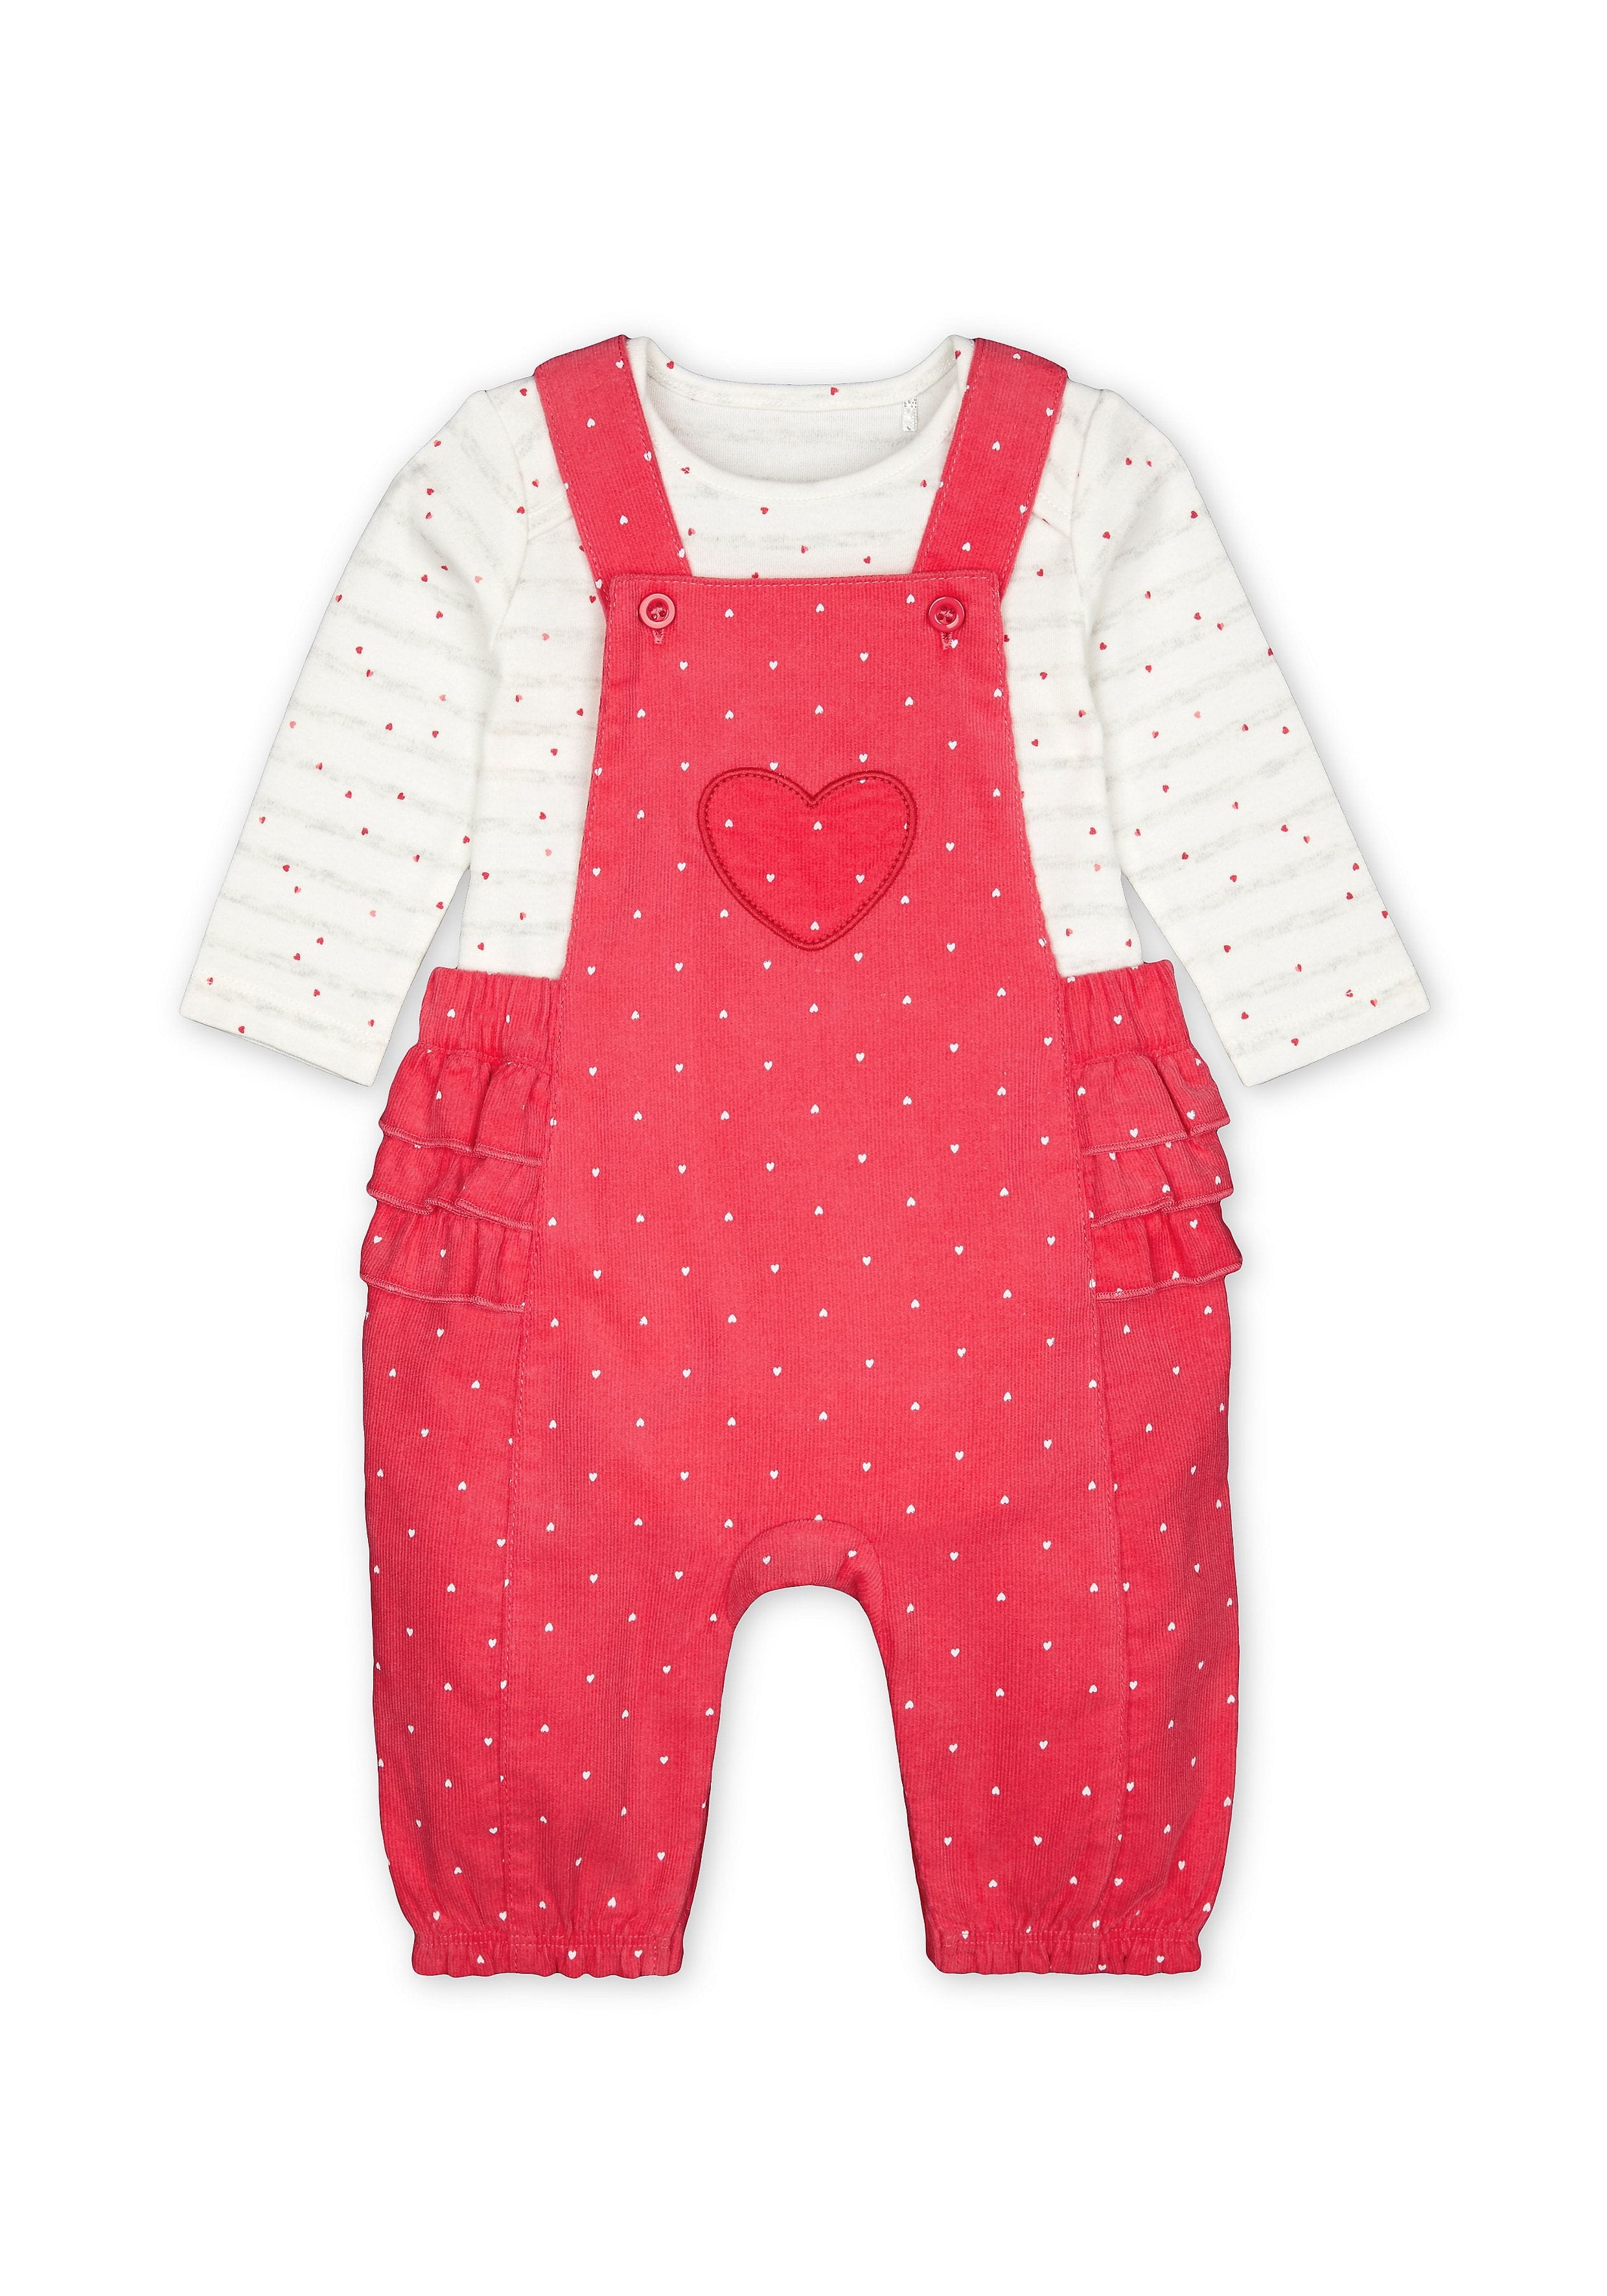 Mothercare | Girls Full Sleeves Cord Dungaree Set Polka Dot Print With Frill Details - Pink White 0